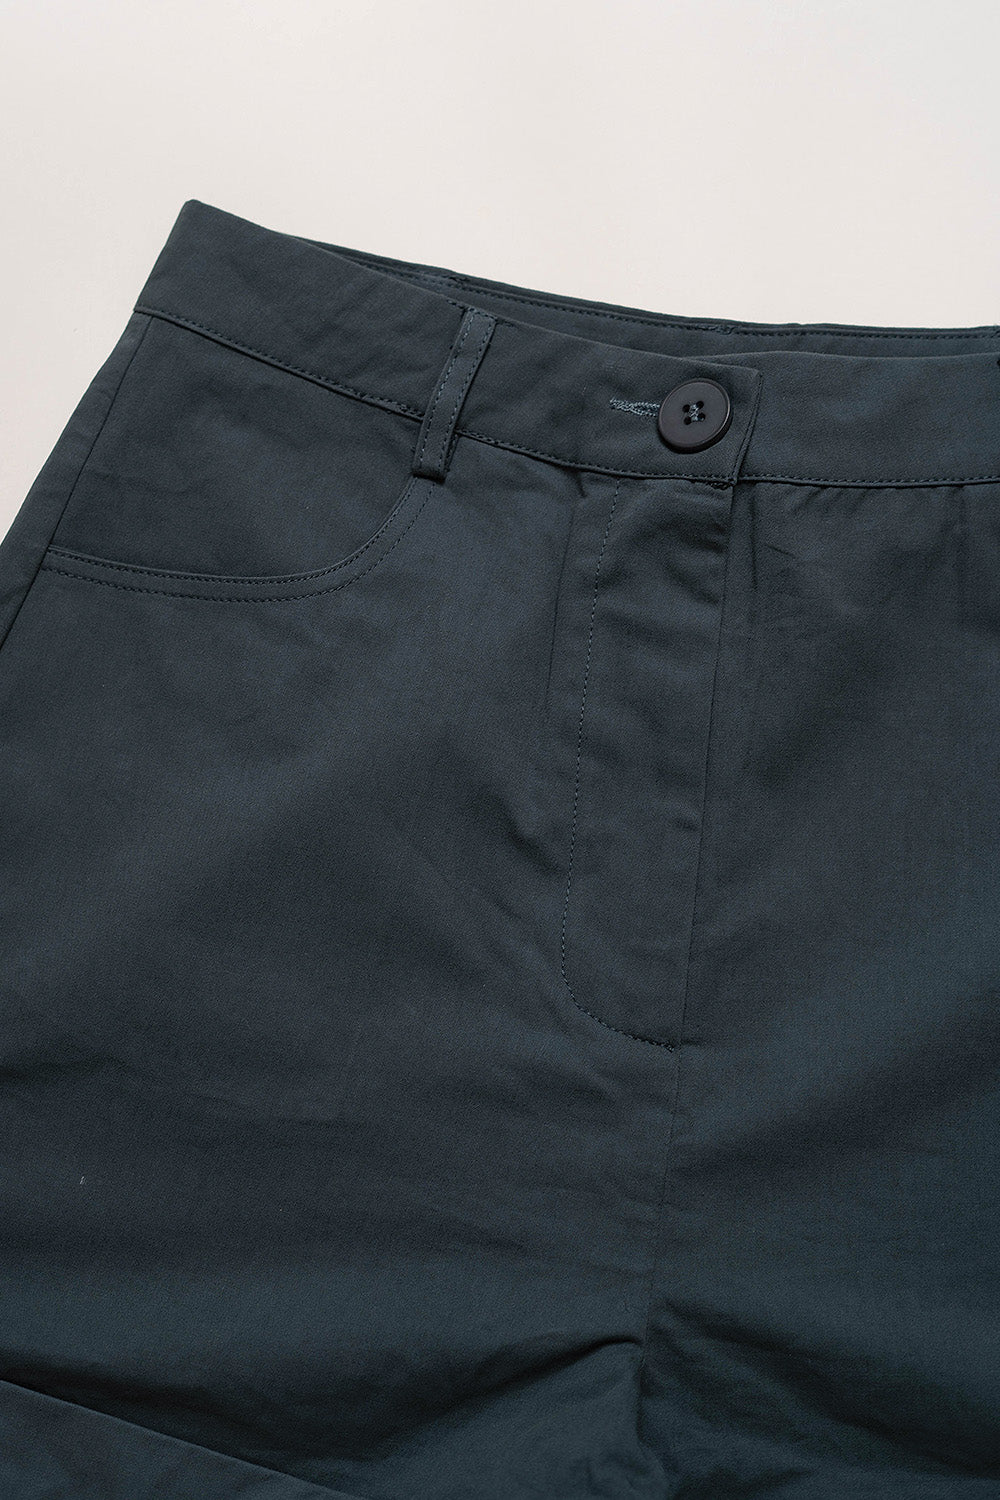 Cotton Twill Shorts (Teal)